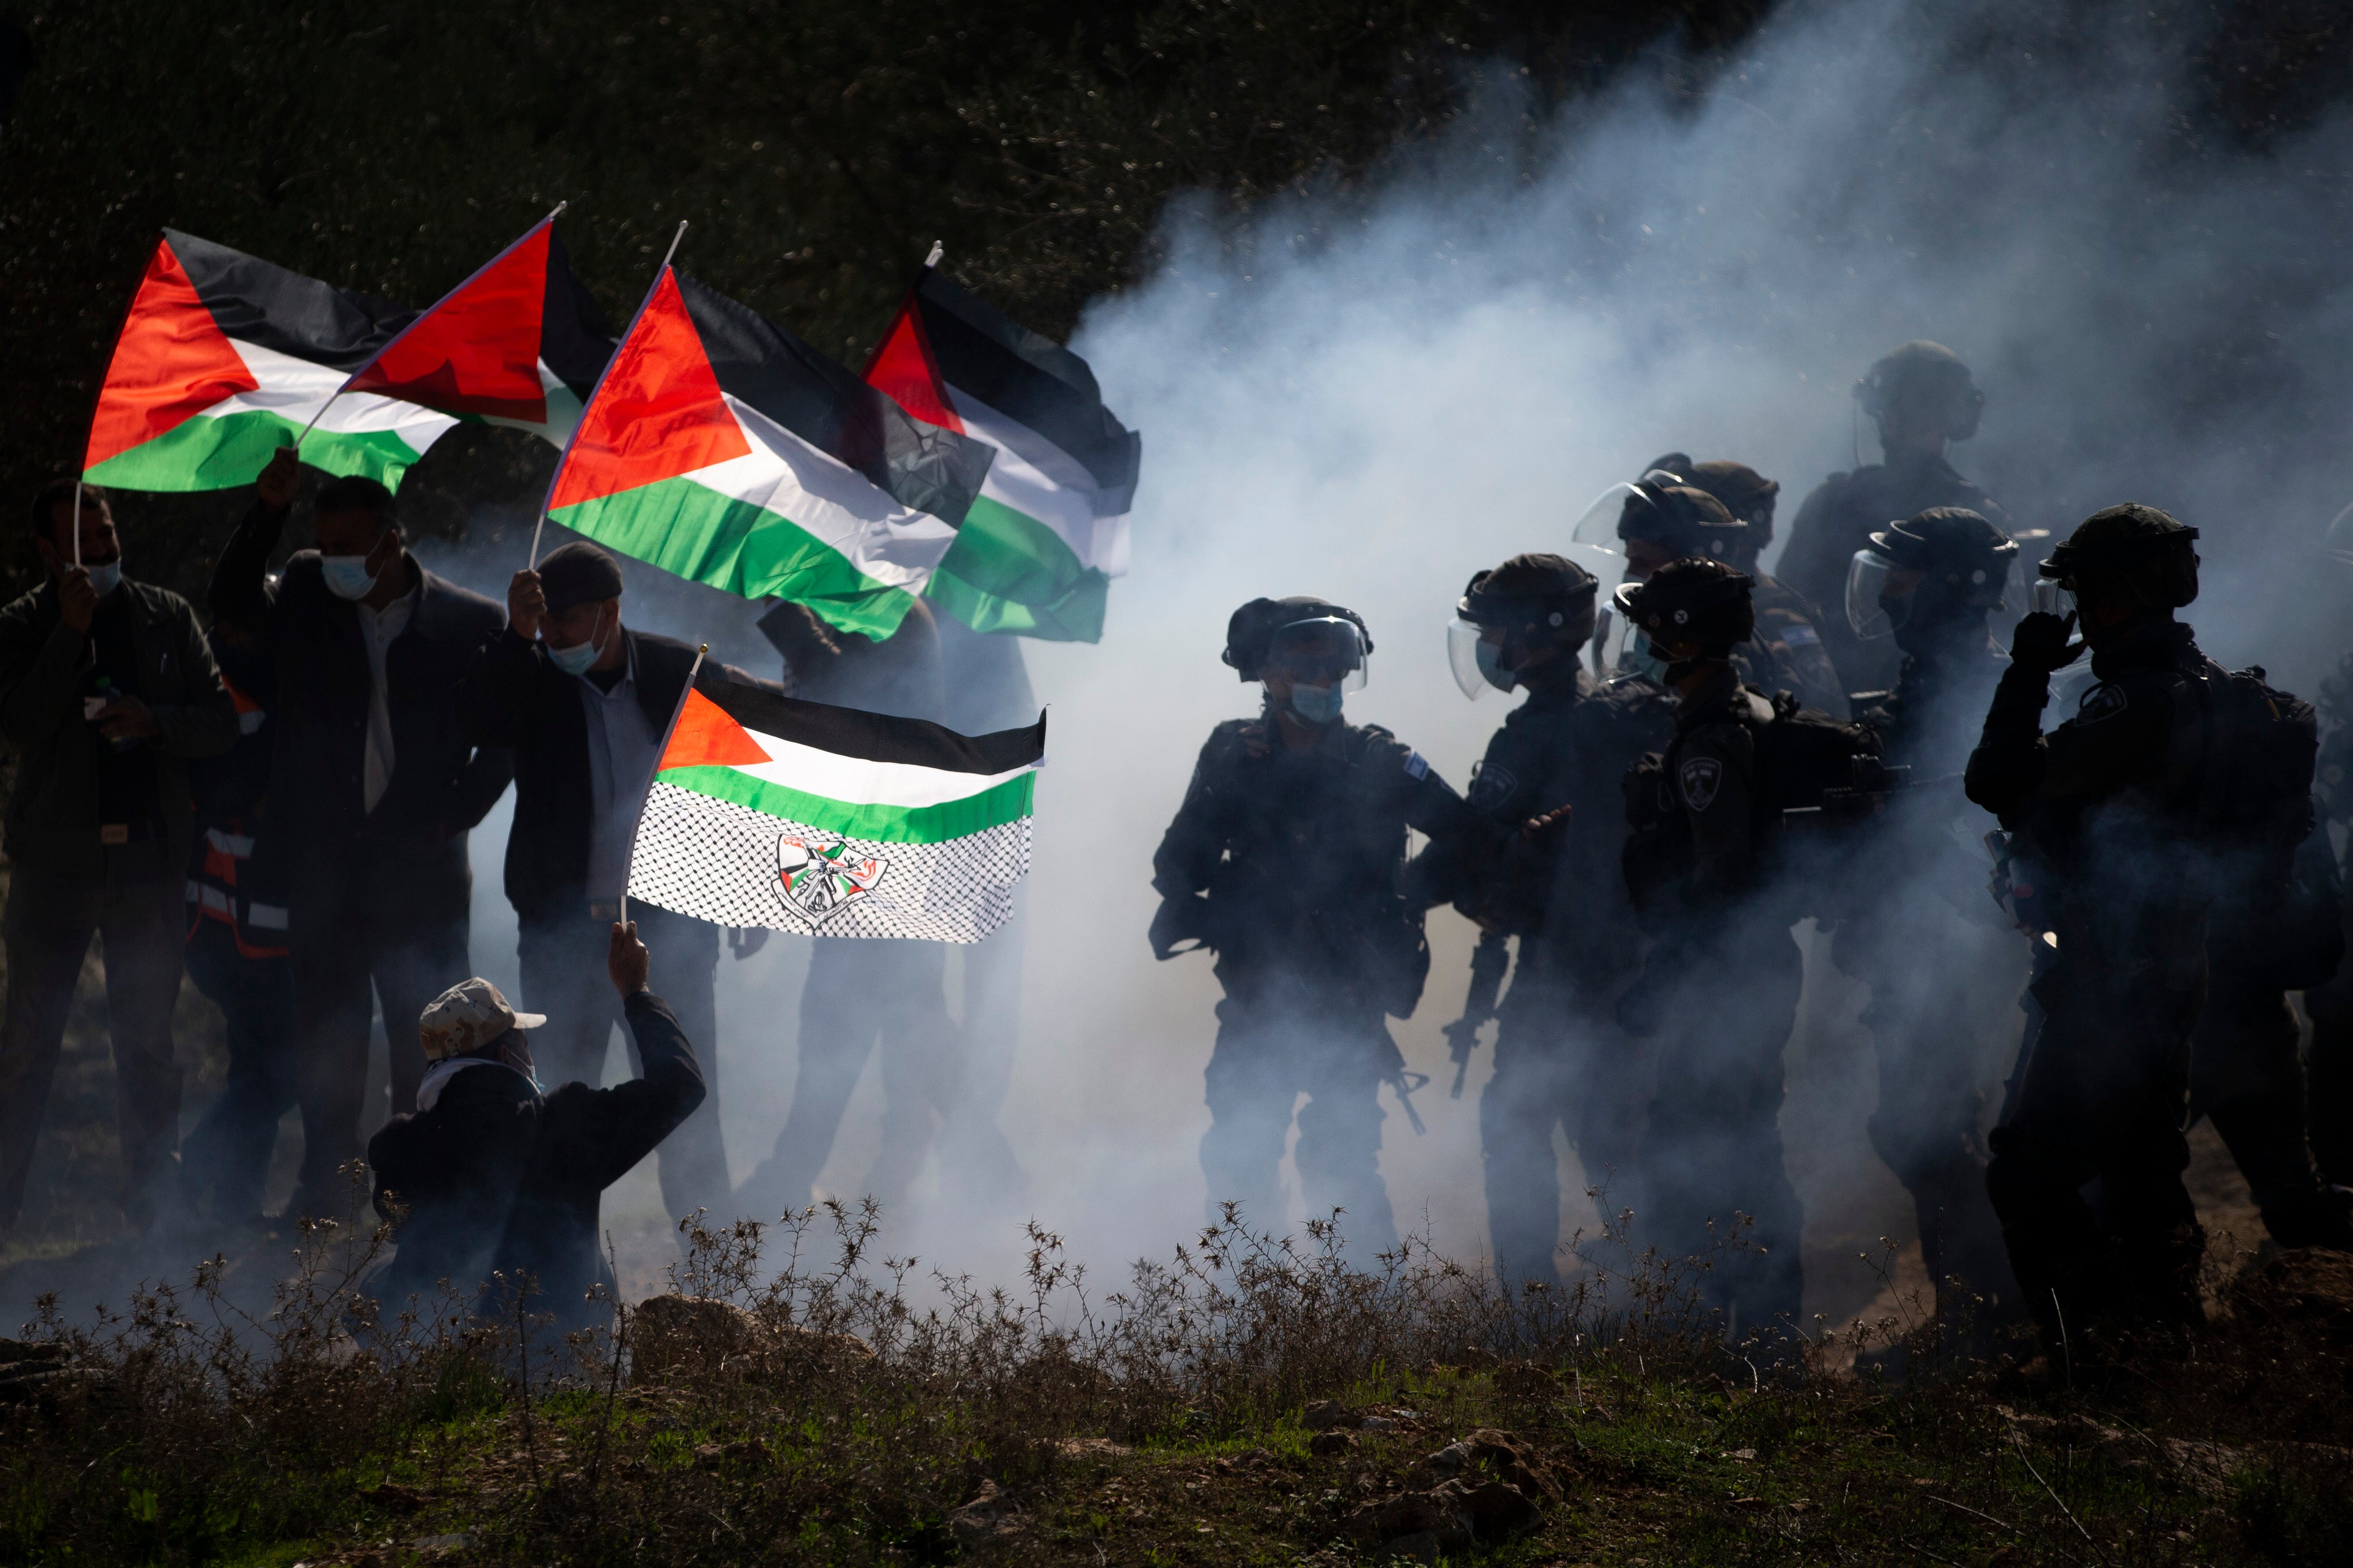 Israeli border police officers and Palestinians clash during a protest against the expansion of Israeli Jewish settlements near the West Bank town of Salfit in December